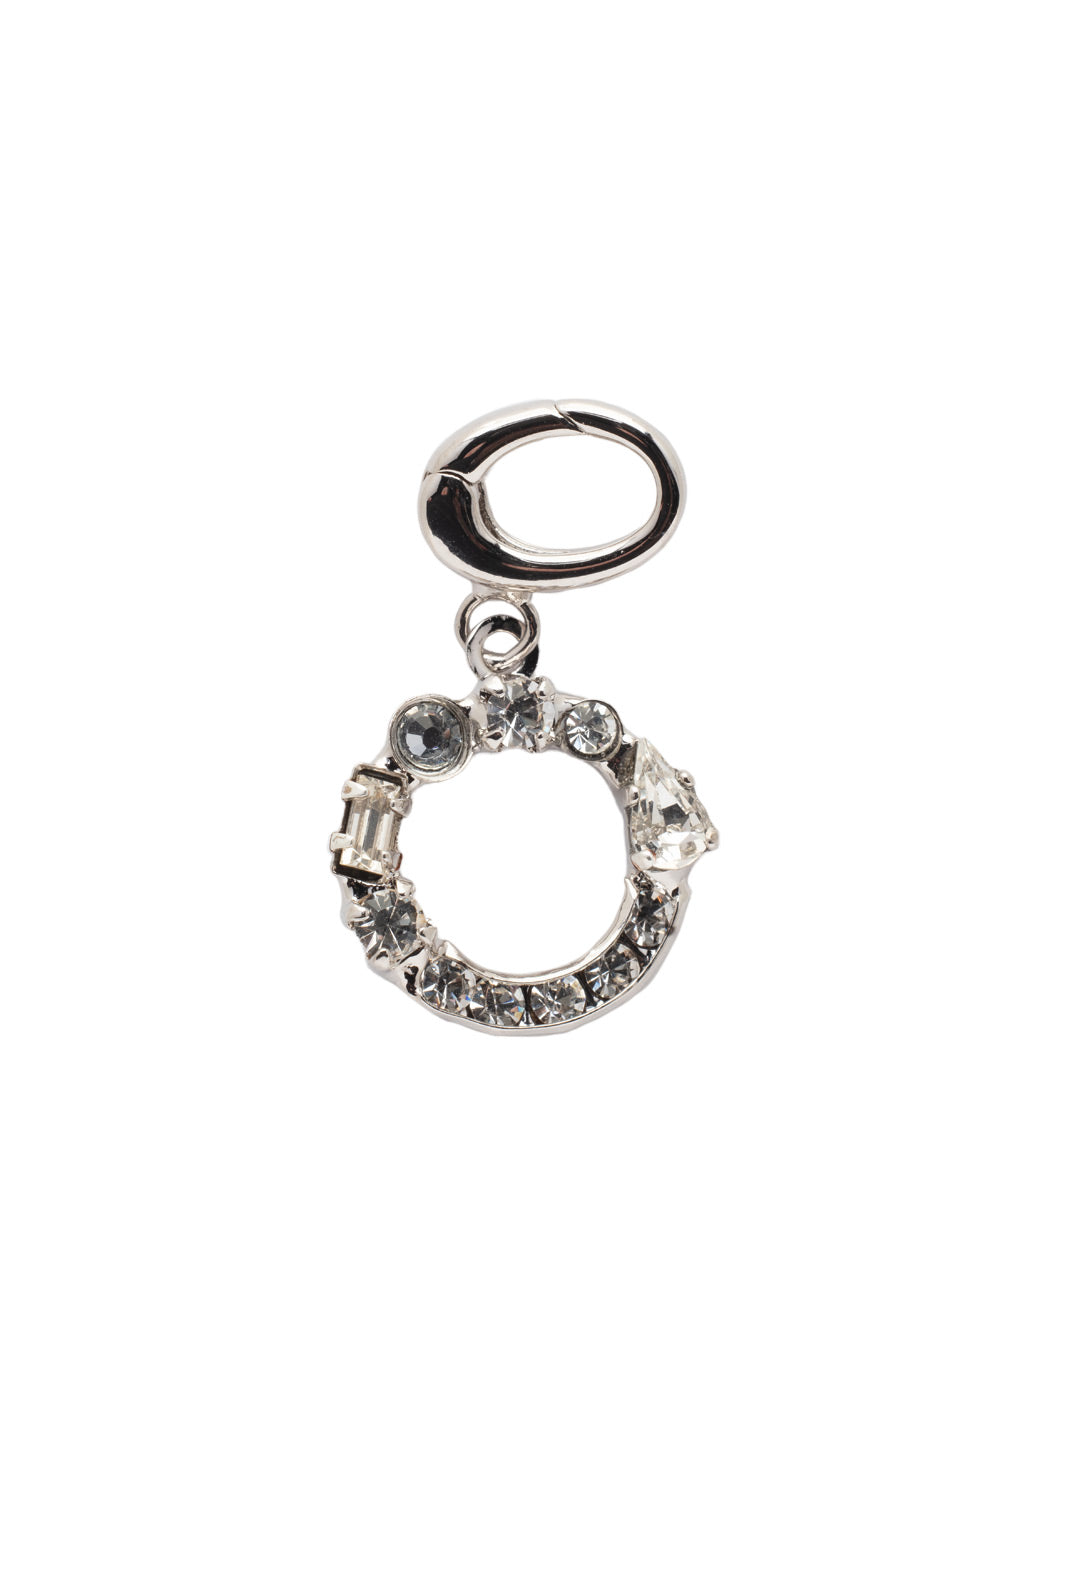 O Initial Charm - CEG16RHCRY - <p>The Initial Charm features a metal monogram letter embellished with an assortment of crystals and secured with an O clasp to easily add and take off different chains. From Sorrelli's Crystal collection in our Palladium Silver-tone finish.</p>